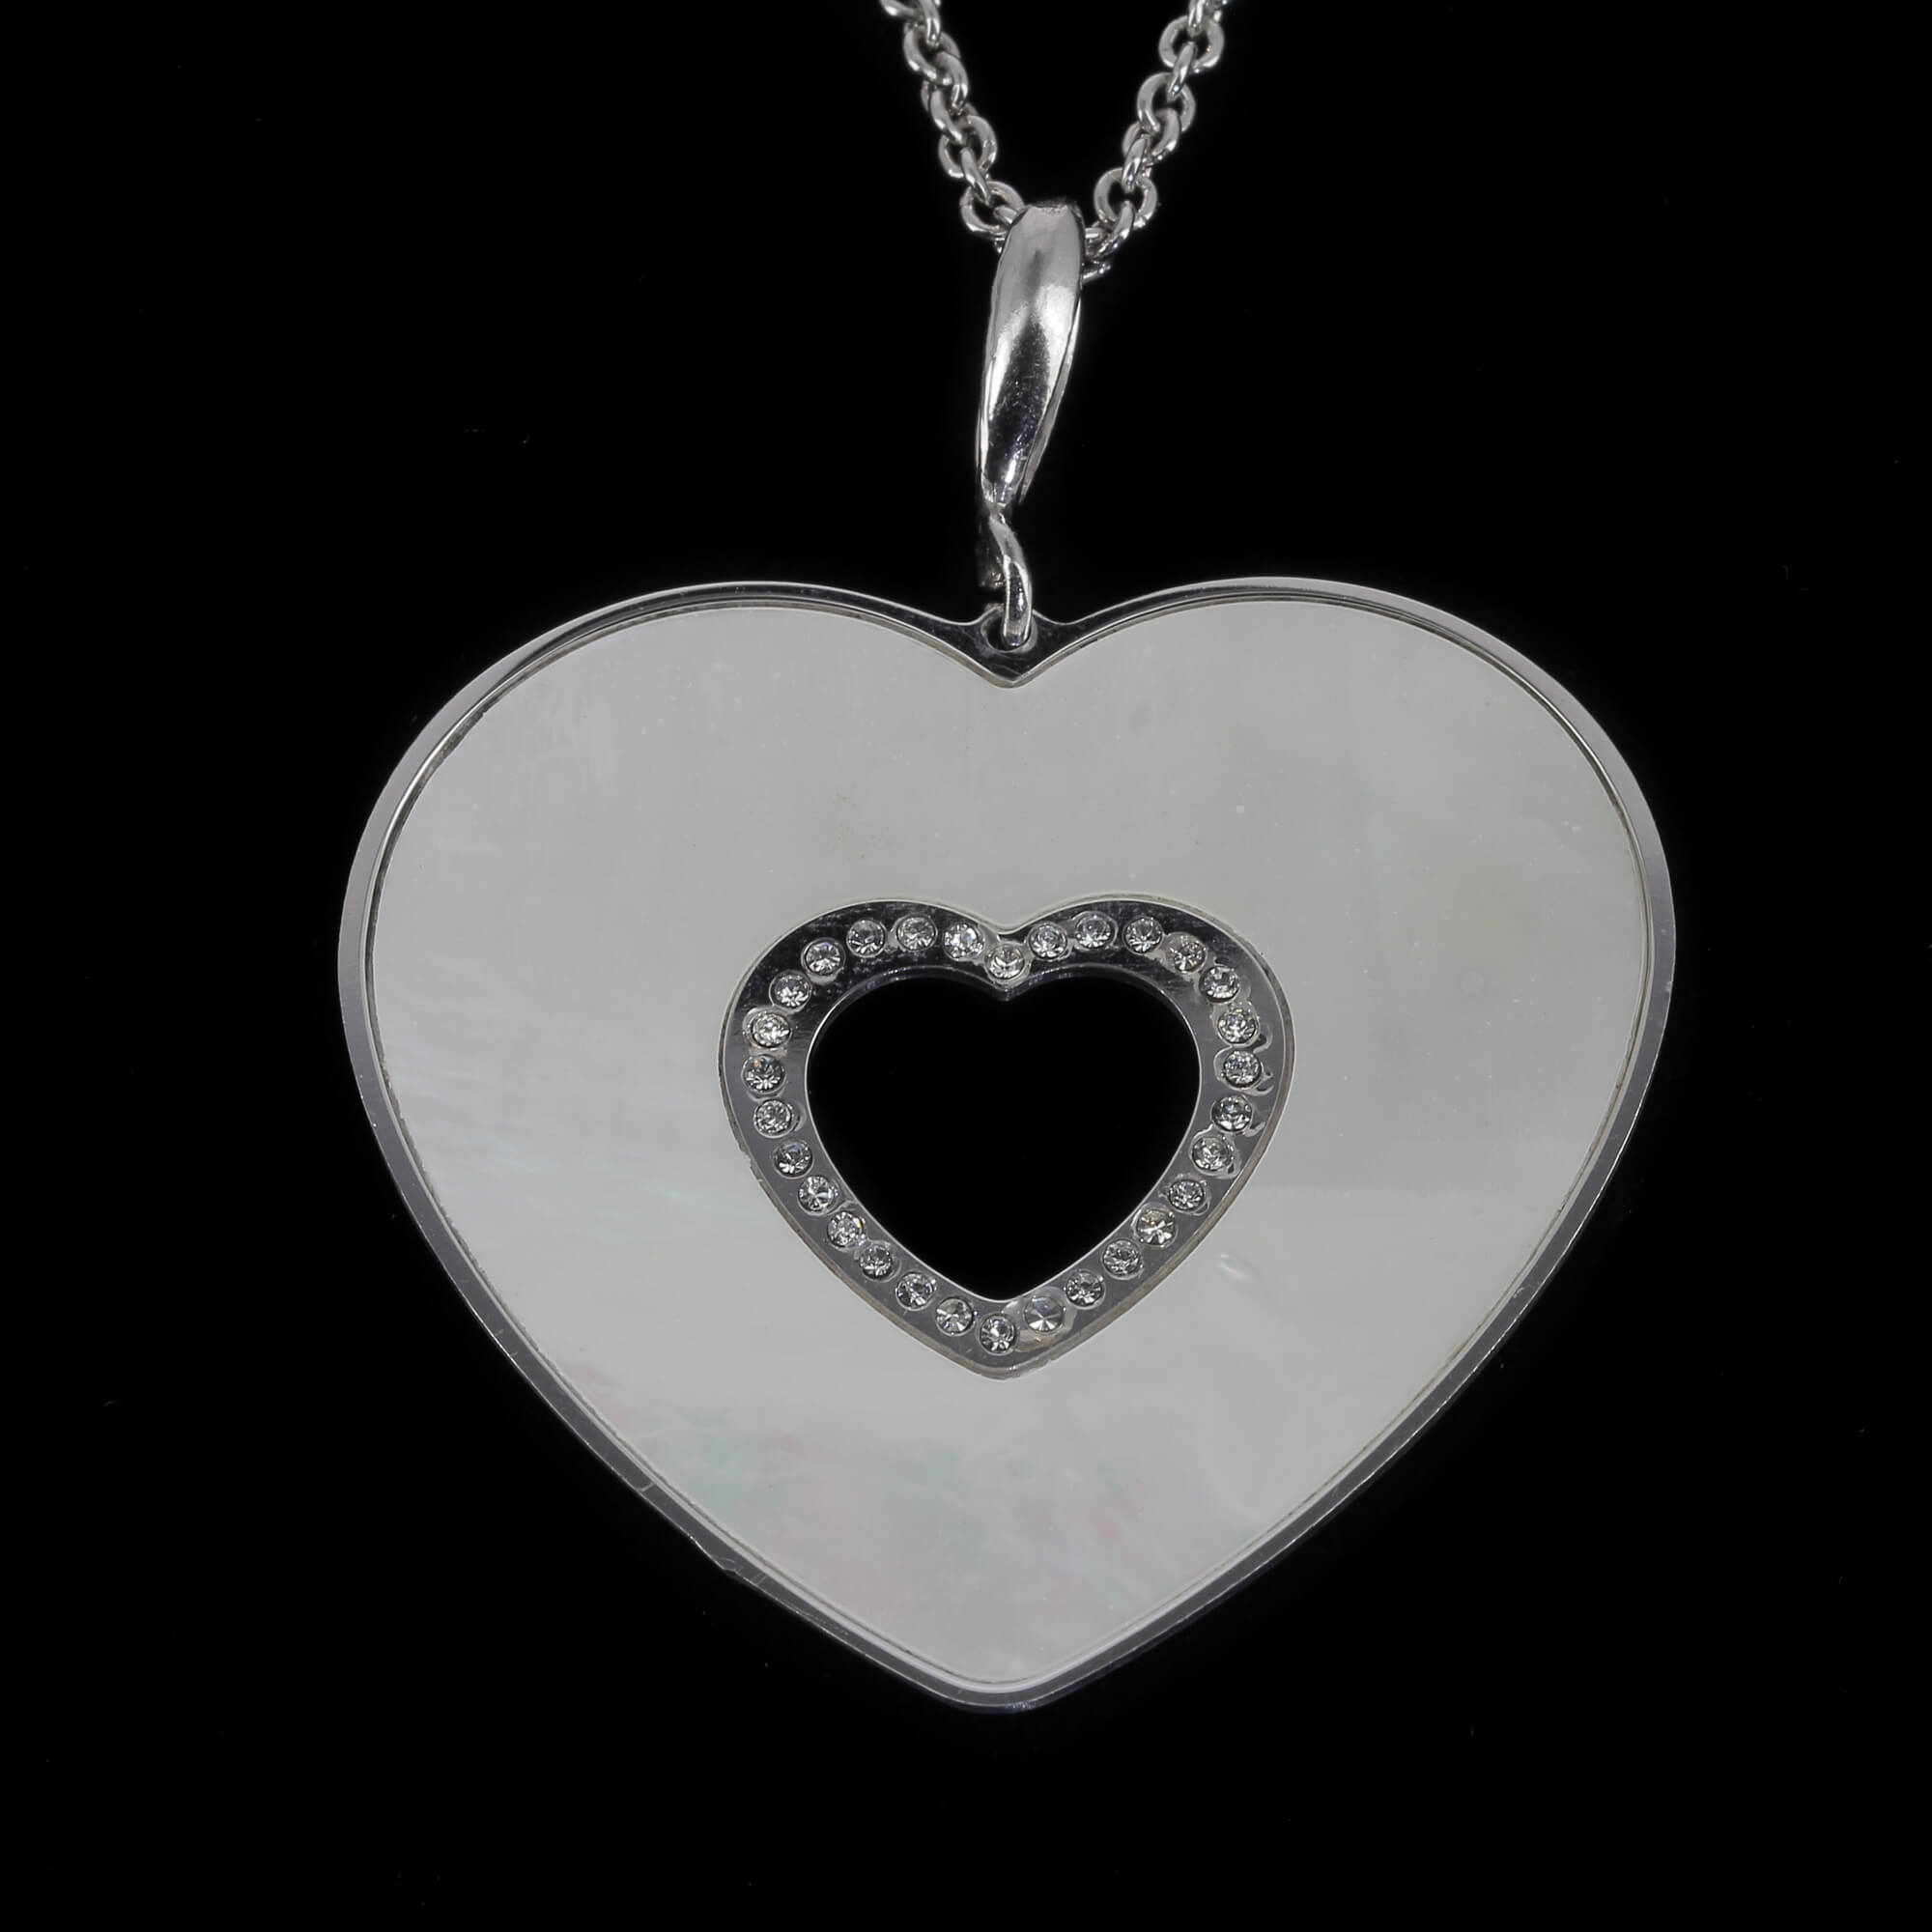 Italian silver necklace with heart shaped pendant